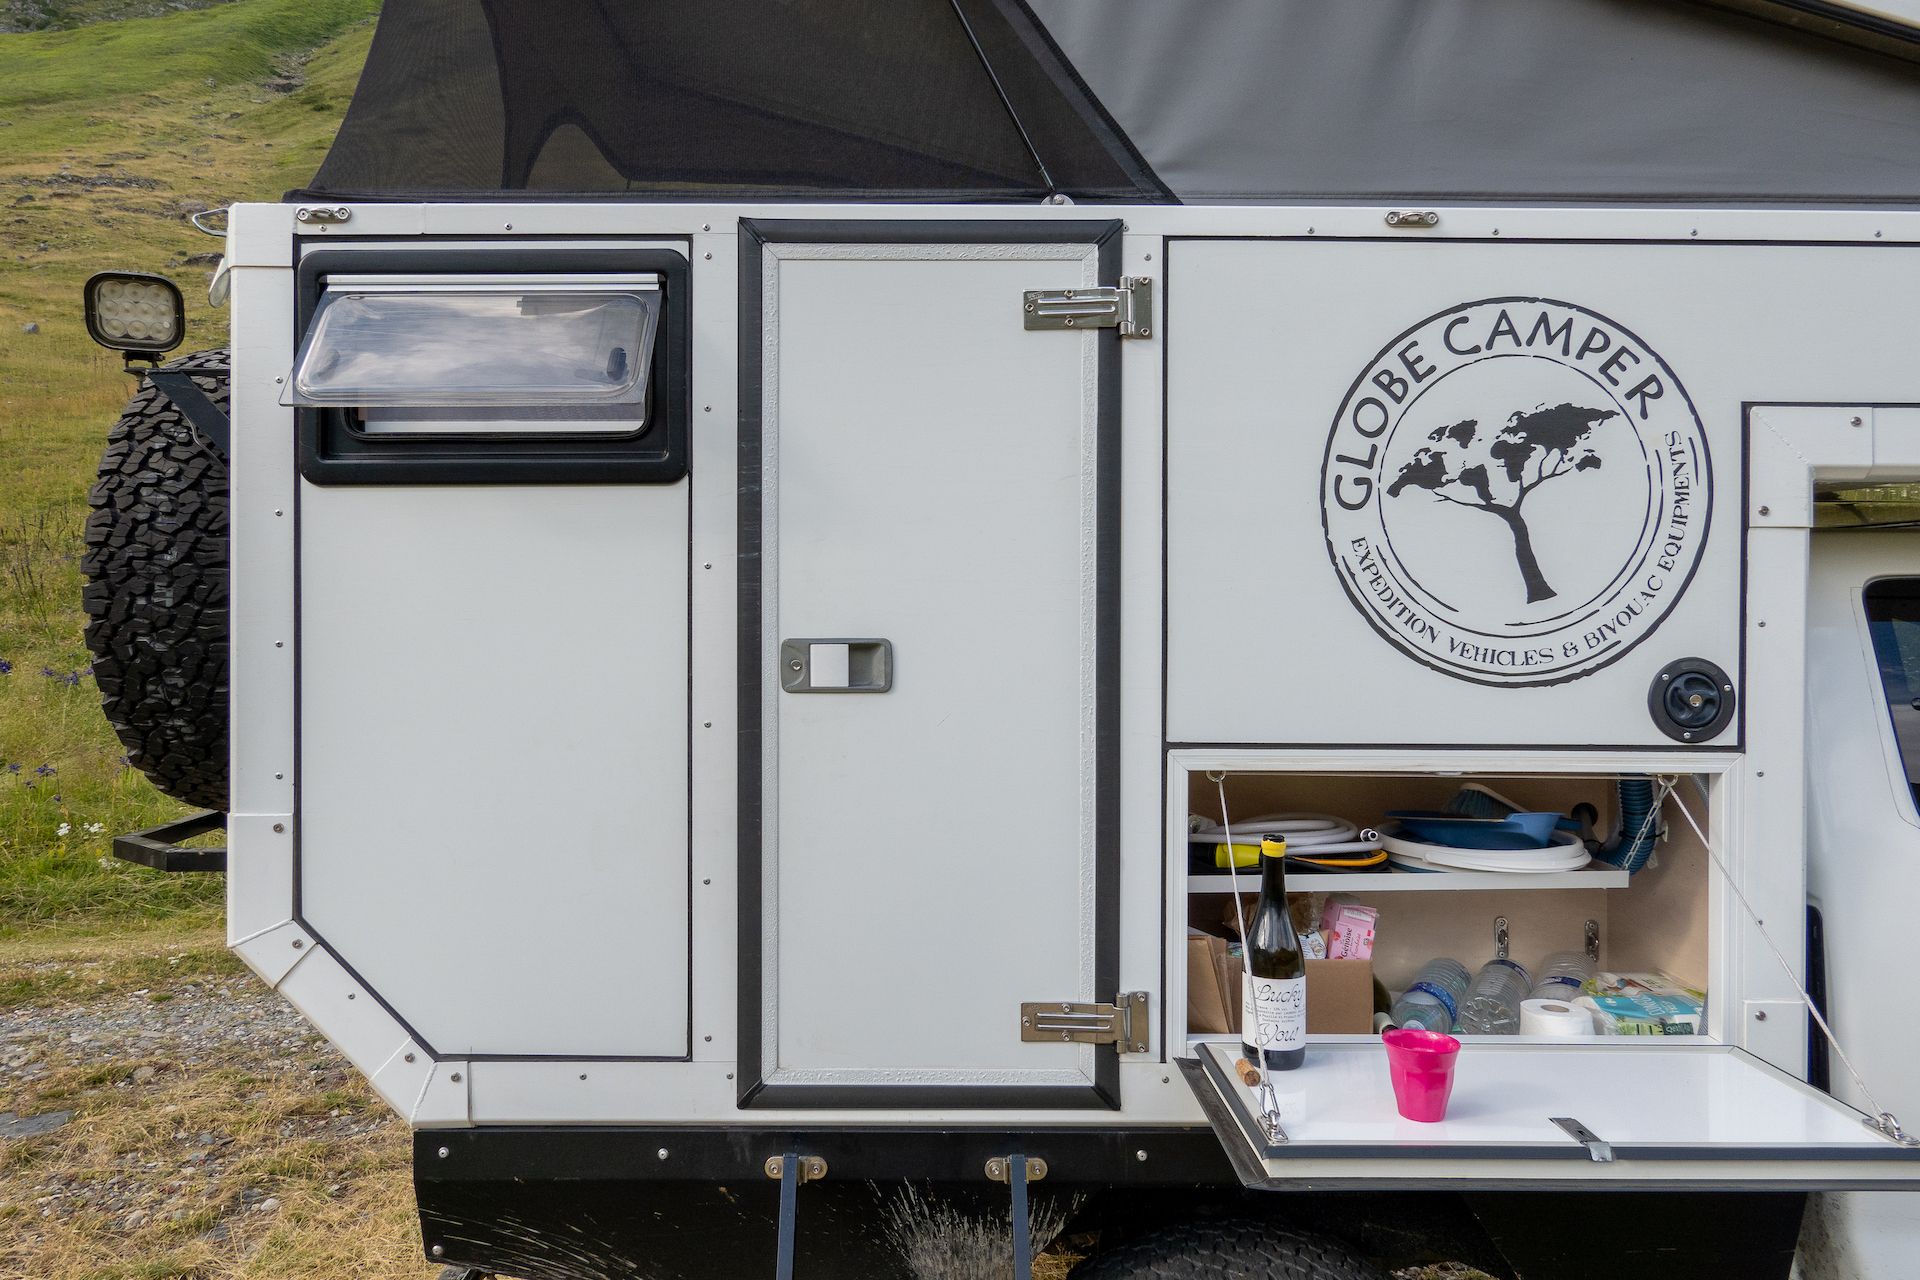 Food for thought: A very convenient feature on the Globe Camper we borrowed in France last Summer